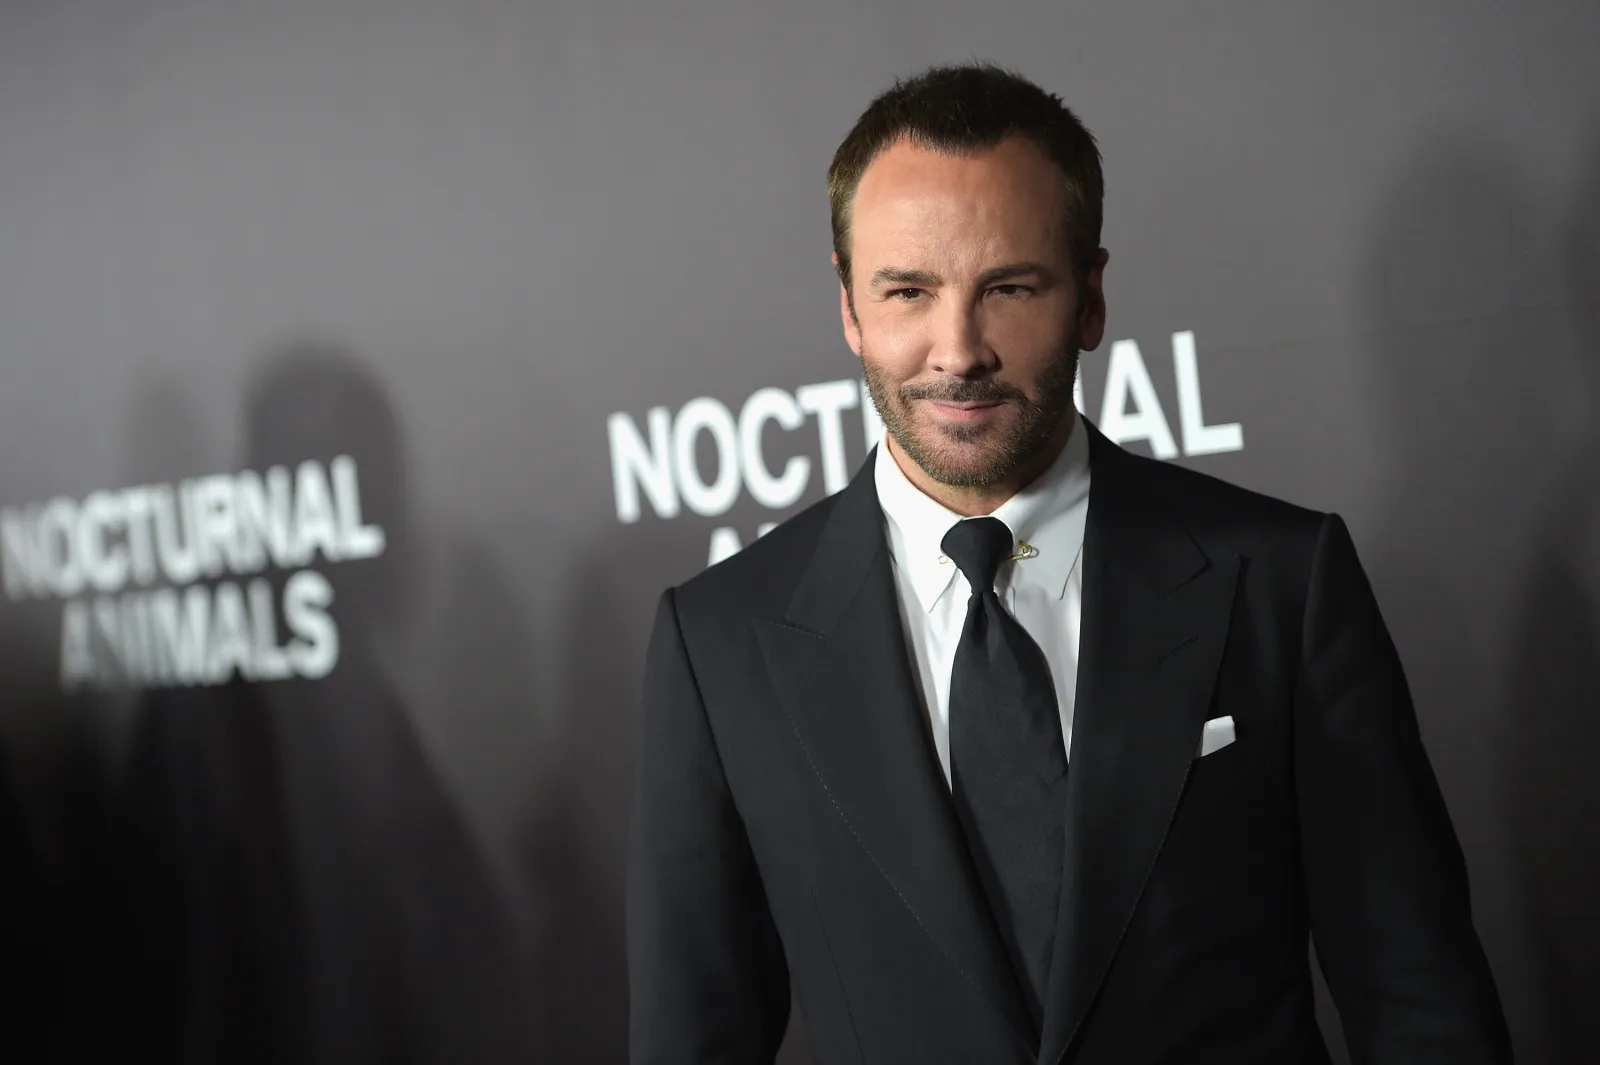 Fashion designer Tom Ford says sleeping with men 'doesn't make you gay ...